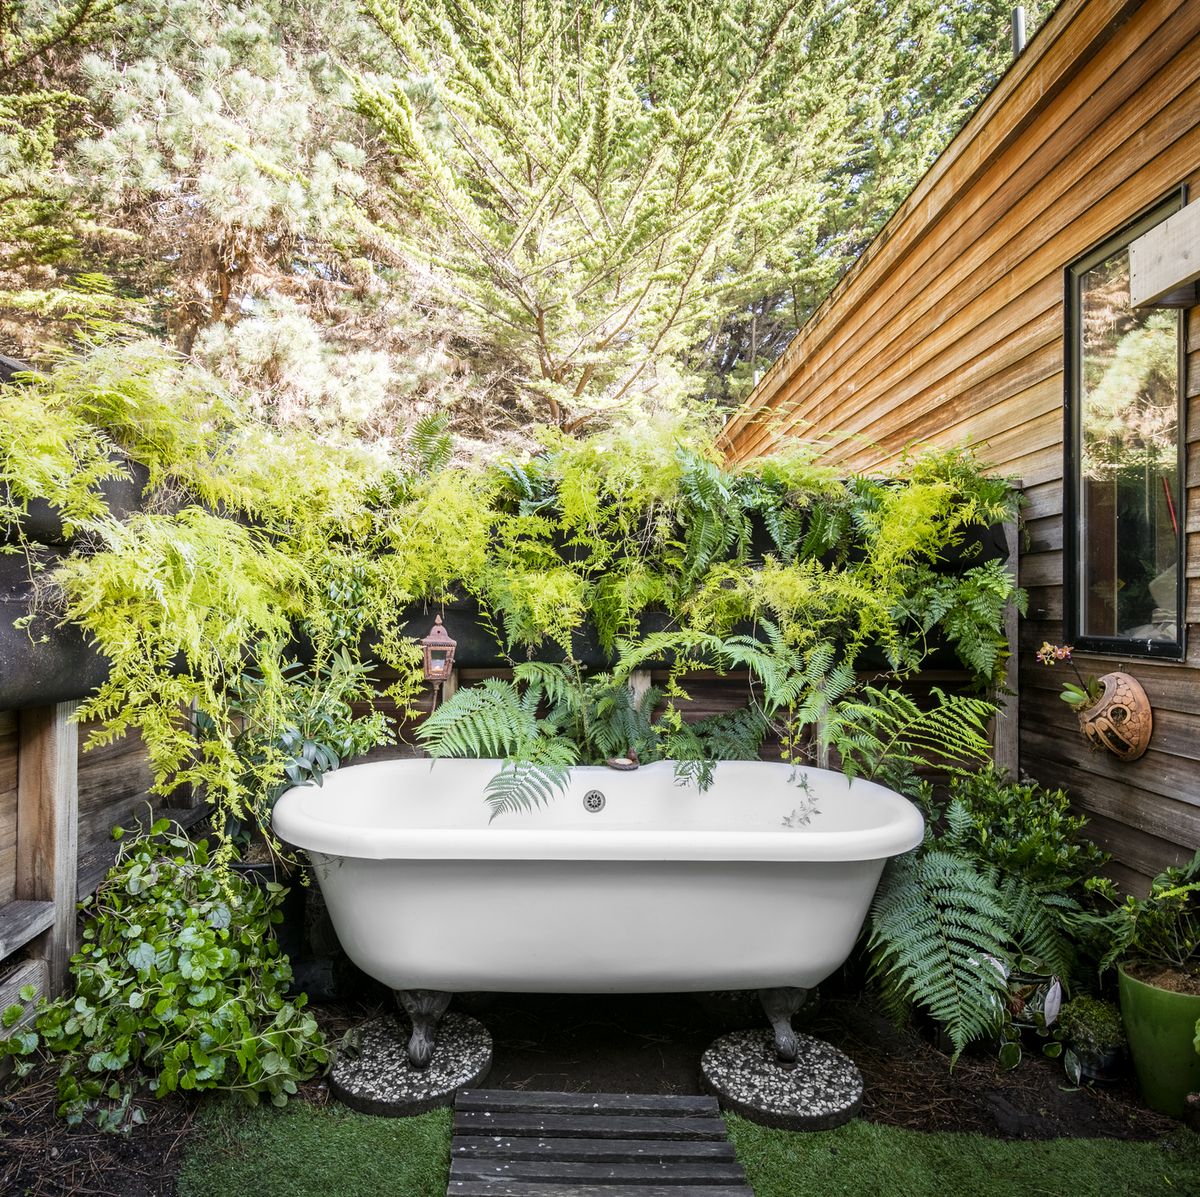 How to turn your hot tub into a 'cool tub' for summer